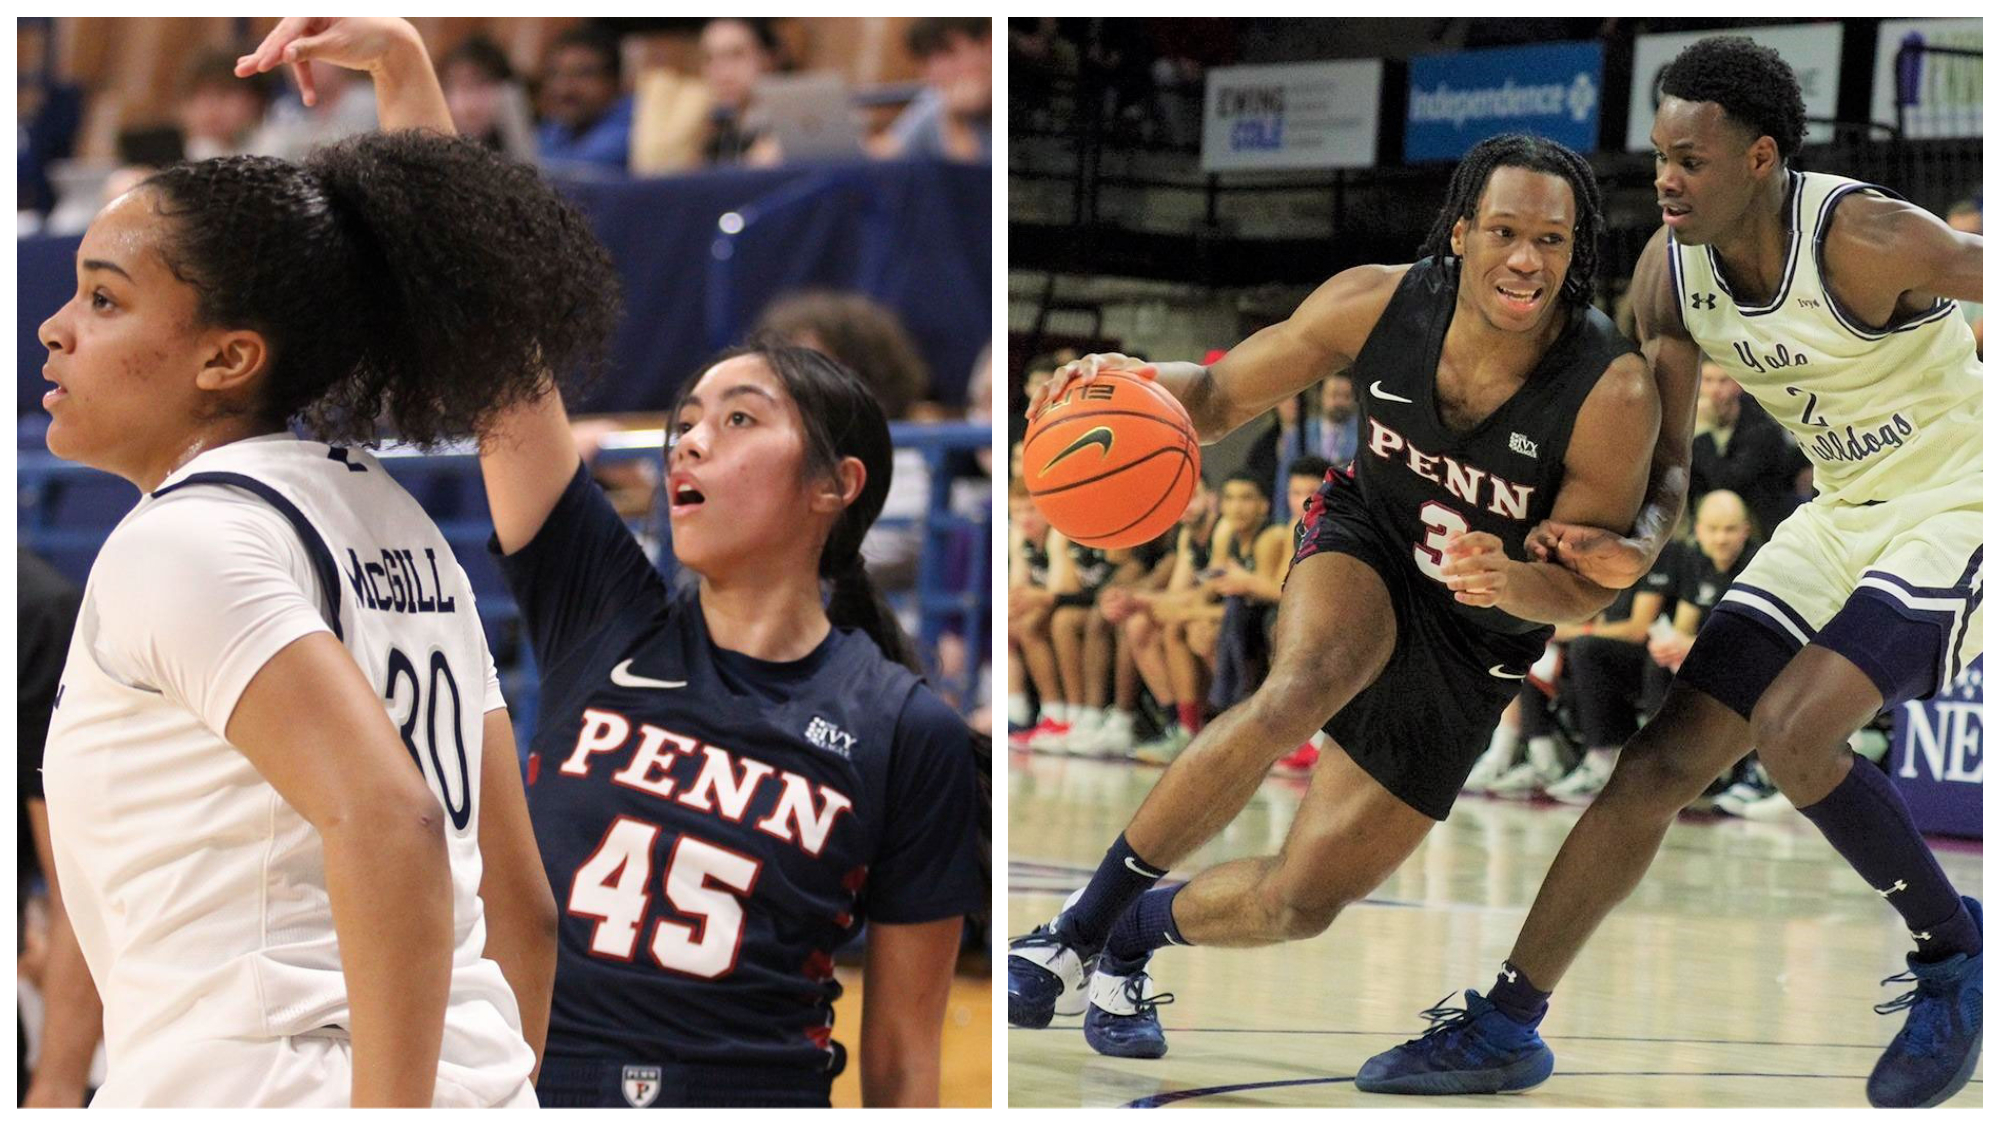 In two action shots, Padilla watches the basketball ball after she shoots it. Dingle leans and dribbles the ball to the basket, rushing past a Yale defender.